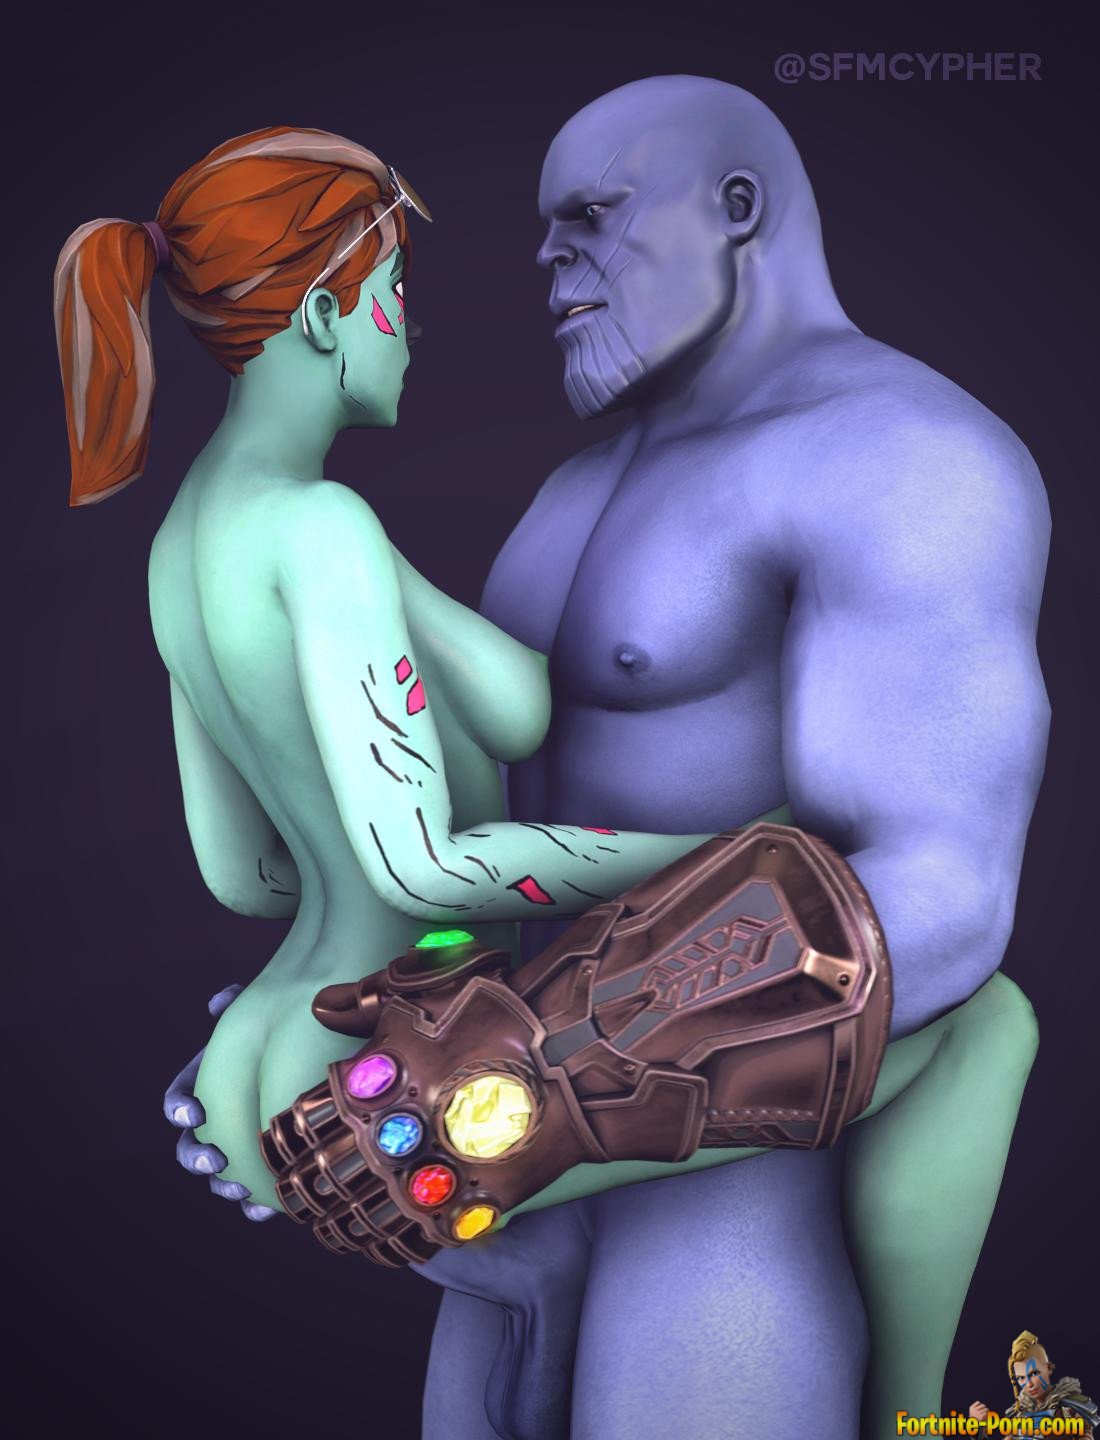 Thanos fucks Ghoul Trooper with the tag Ghoul Trooper, Thanos in category O...